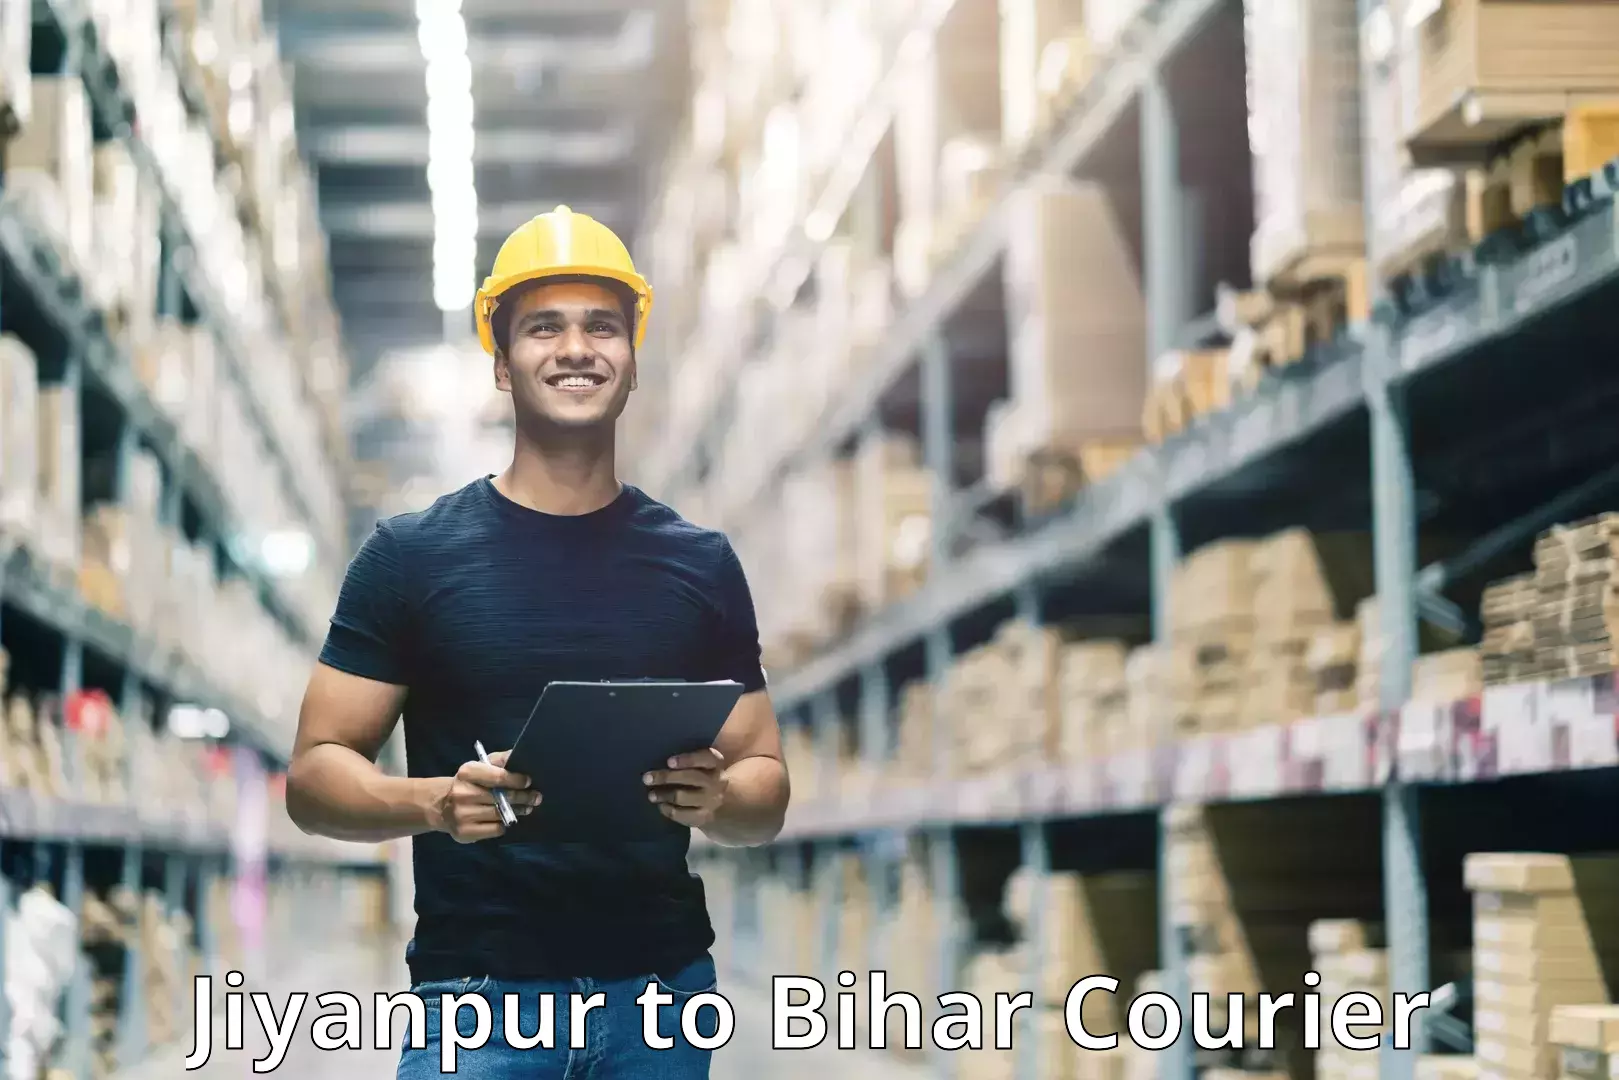 Courier service comparison in Jiyanpur to Singhia